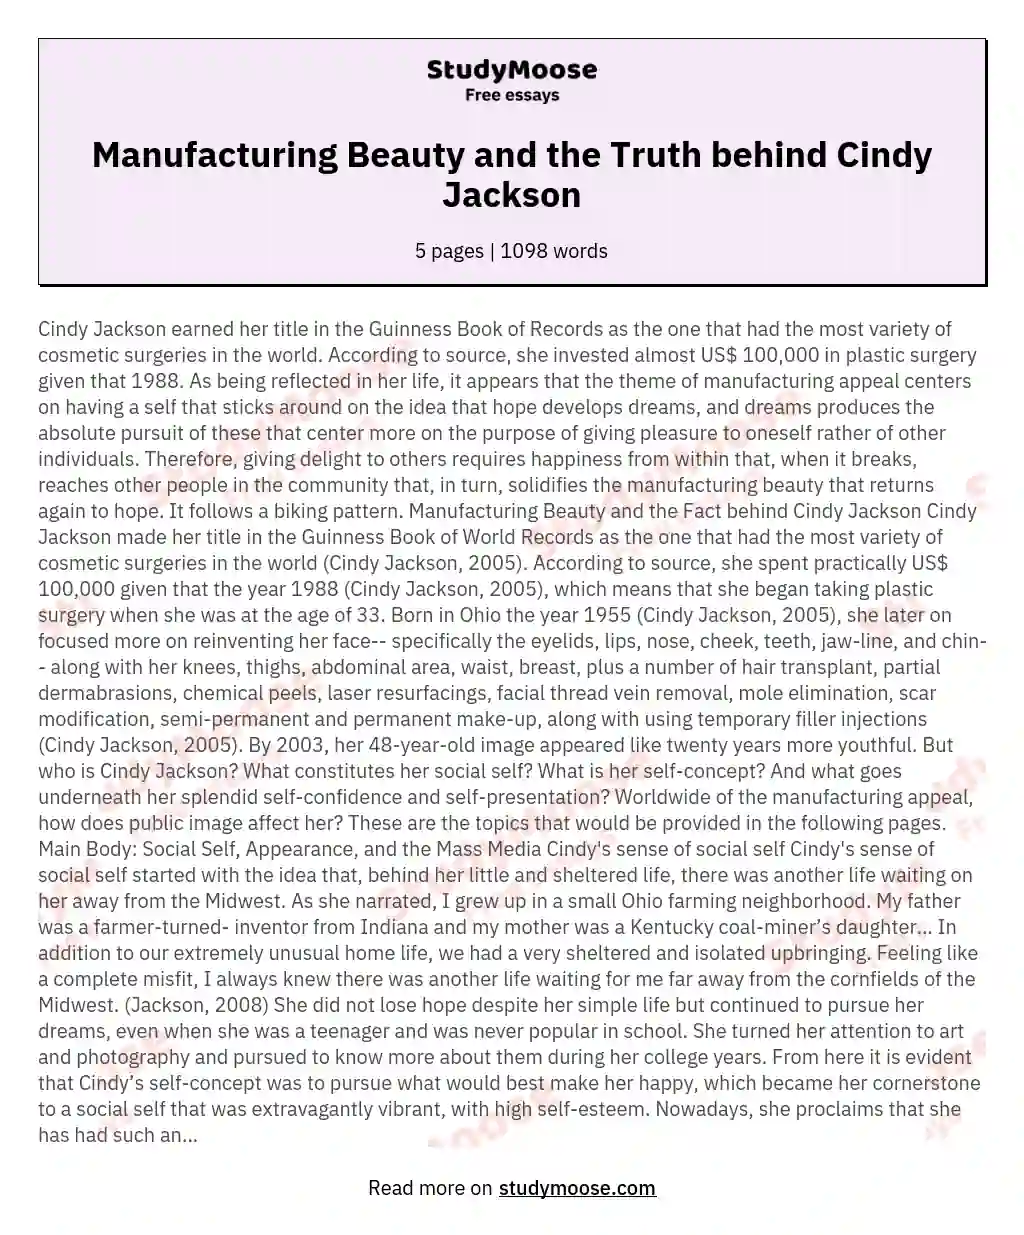 Manufacturing Beauty and the Truth behind Cindy Jackson essay